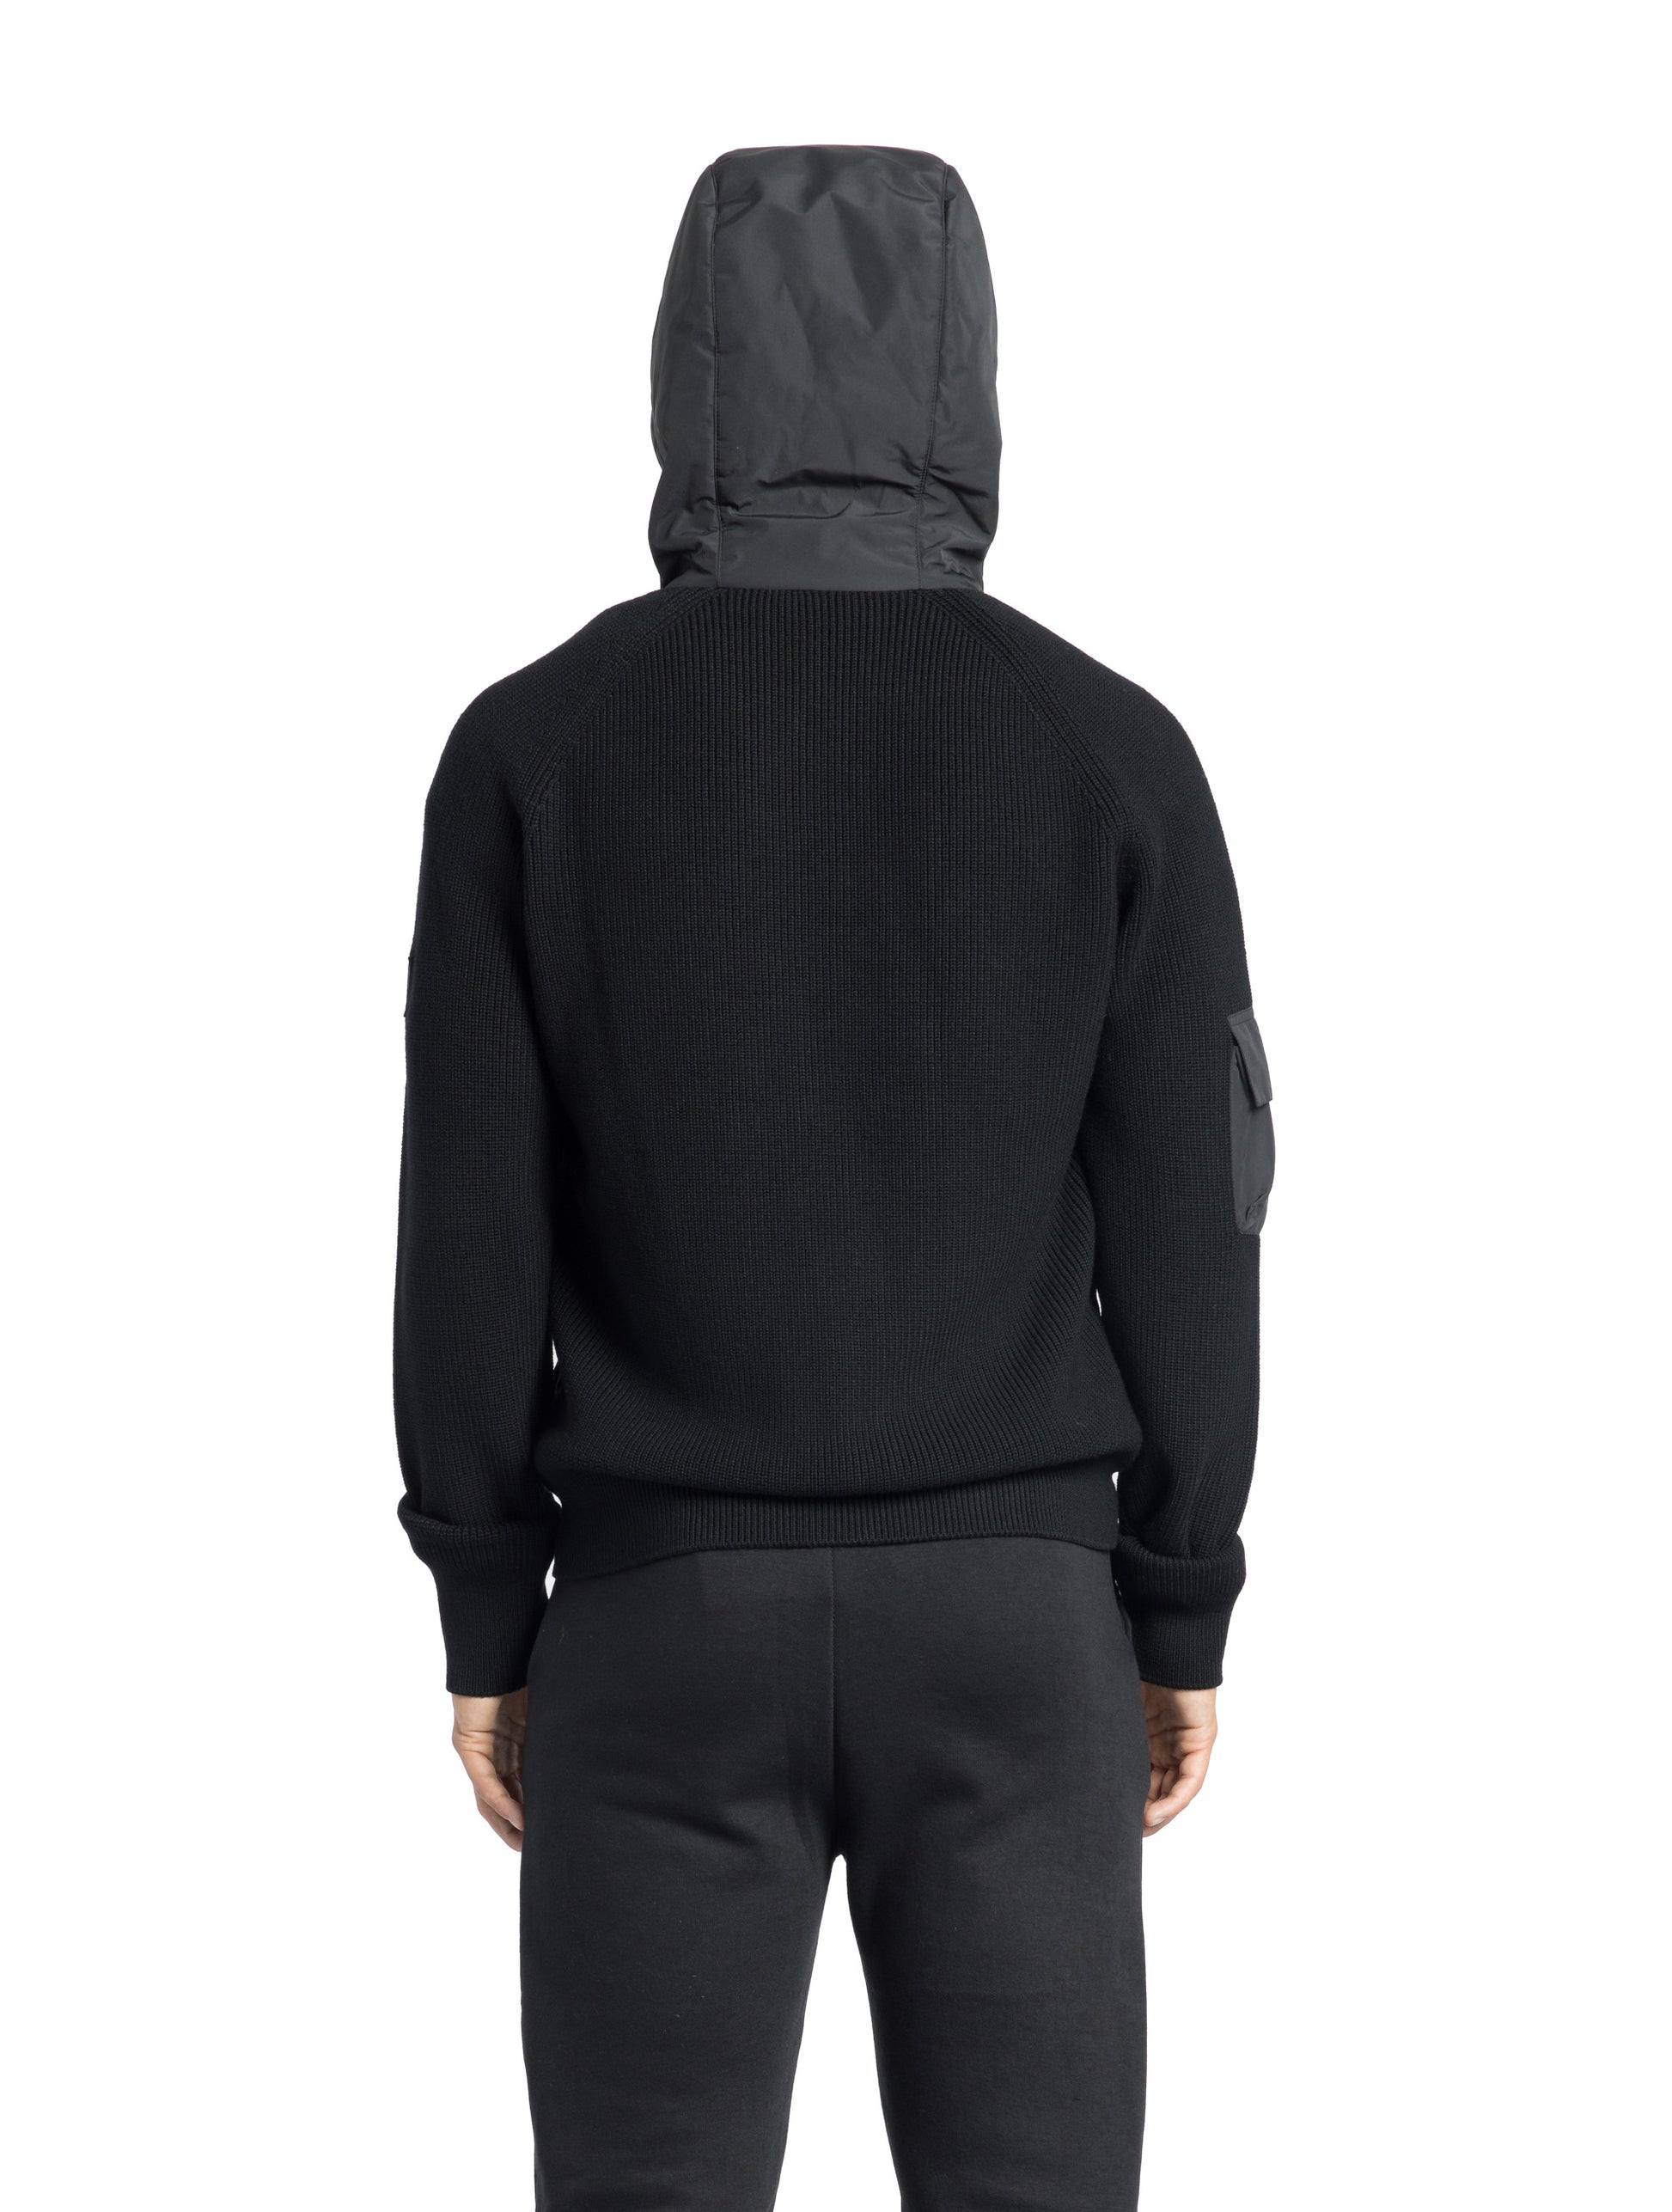 Hedge Men's Performance Hoodie in hip length, premium 3-ply micro denier and 100% virgin extra fine merino wool knit fabrication, Primaloft Gold Insulation Active+, non-removable hood with adjustable drawstrings, two-way centre-front zipper, magnetic closure side-entry pockets at waist, in Black